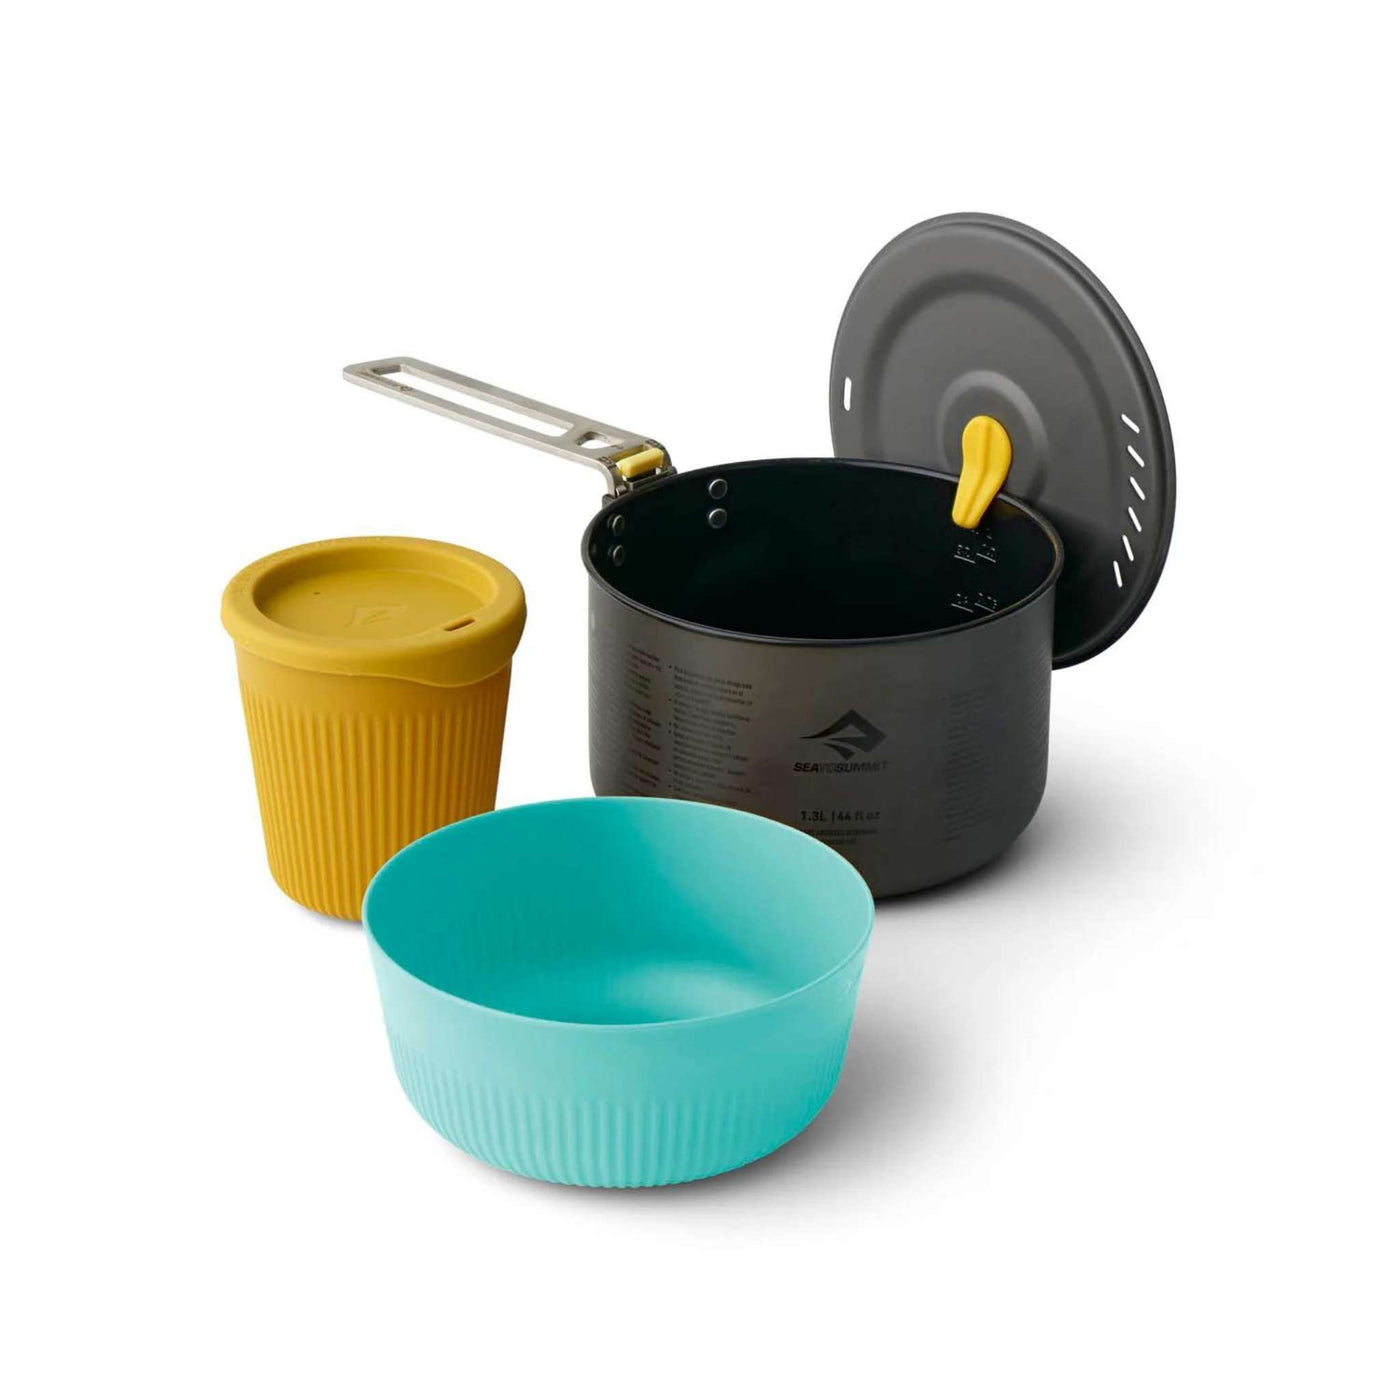 Sea to Summit Frontier One Pot Cook Set - 1P - 3 Piece | Camp Kitchen Cook Set | Further Faster Christchurch NZ | #multi